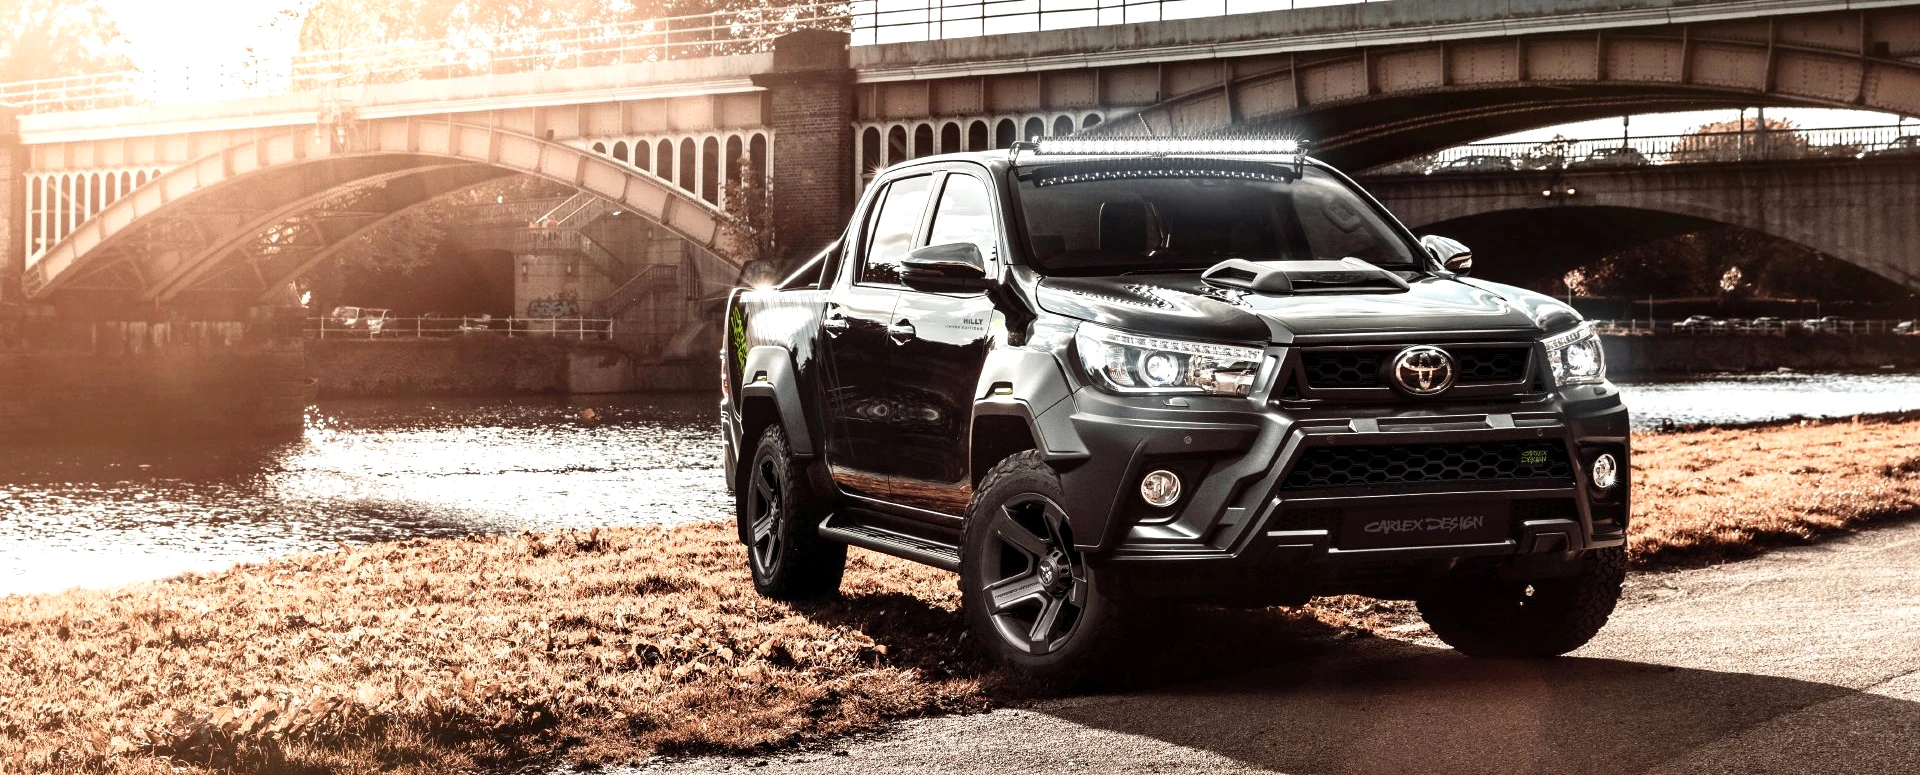 Hilux HiLLY